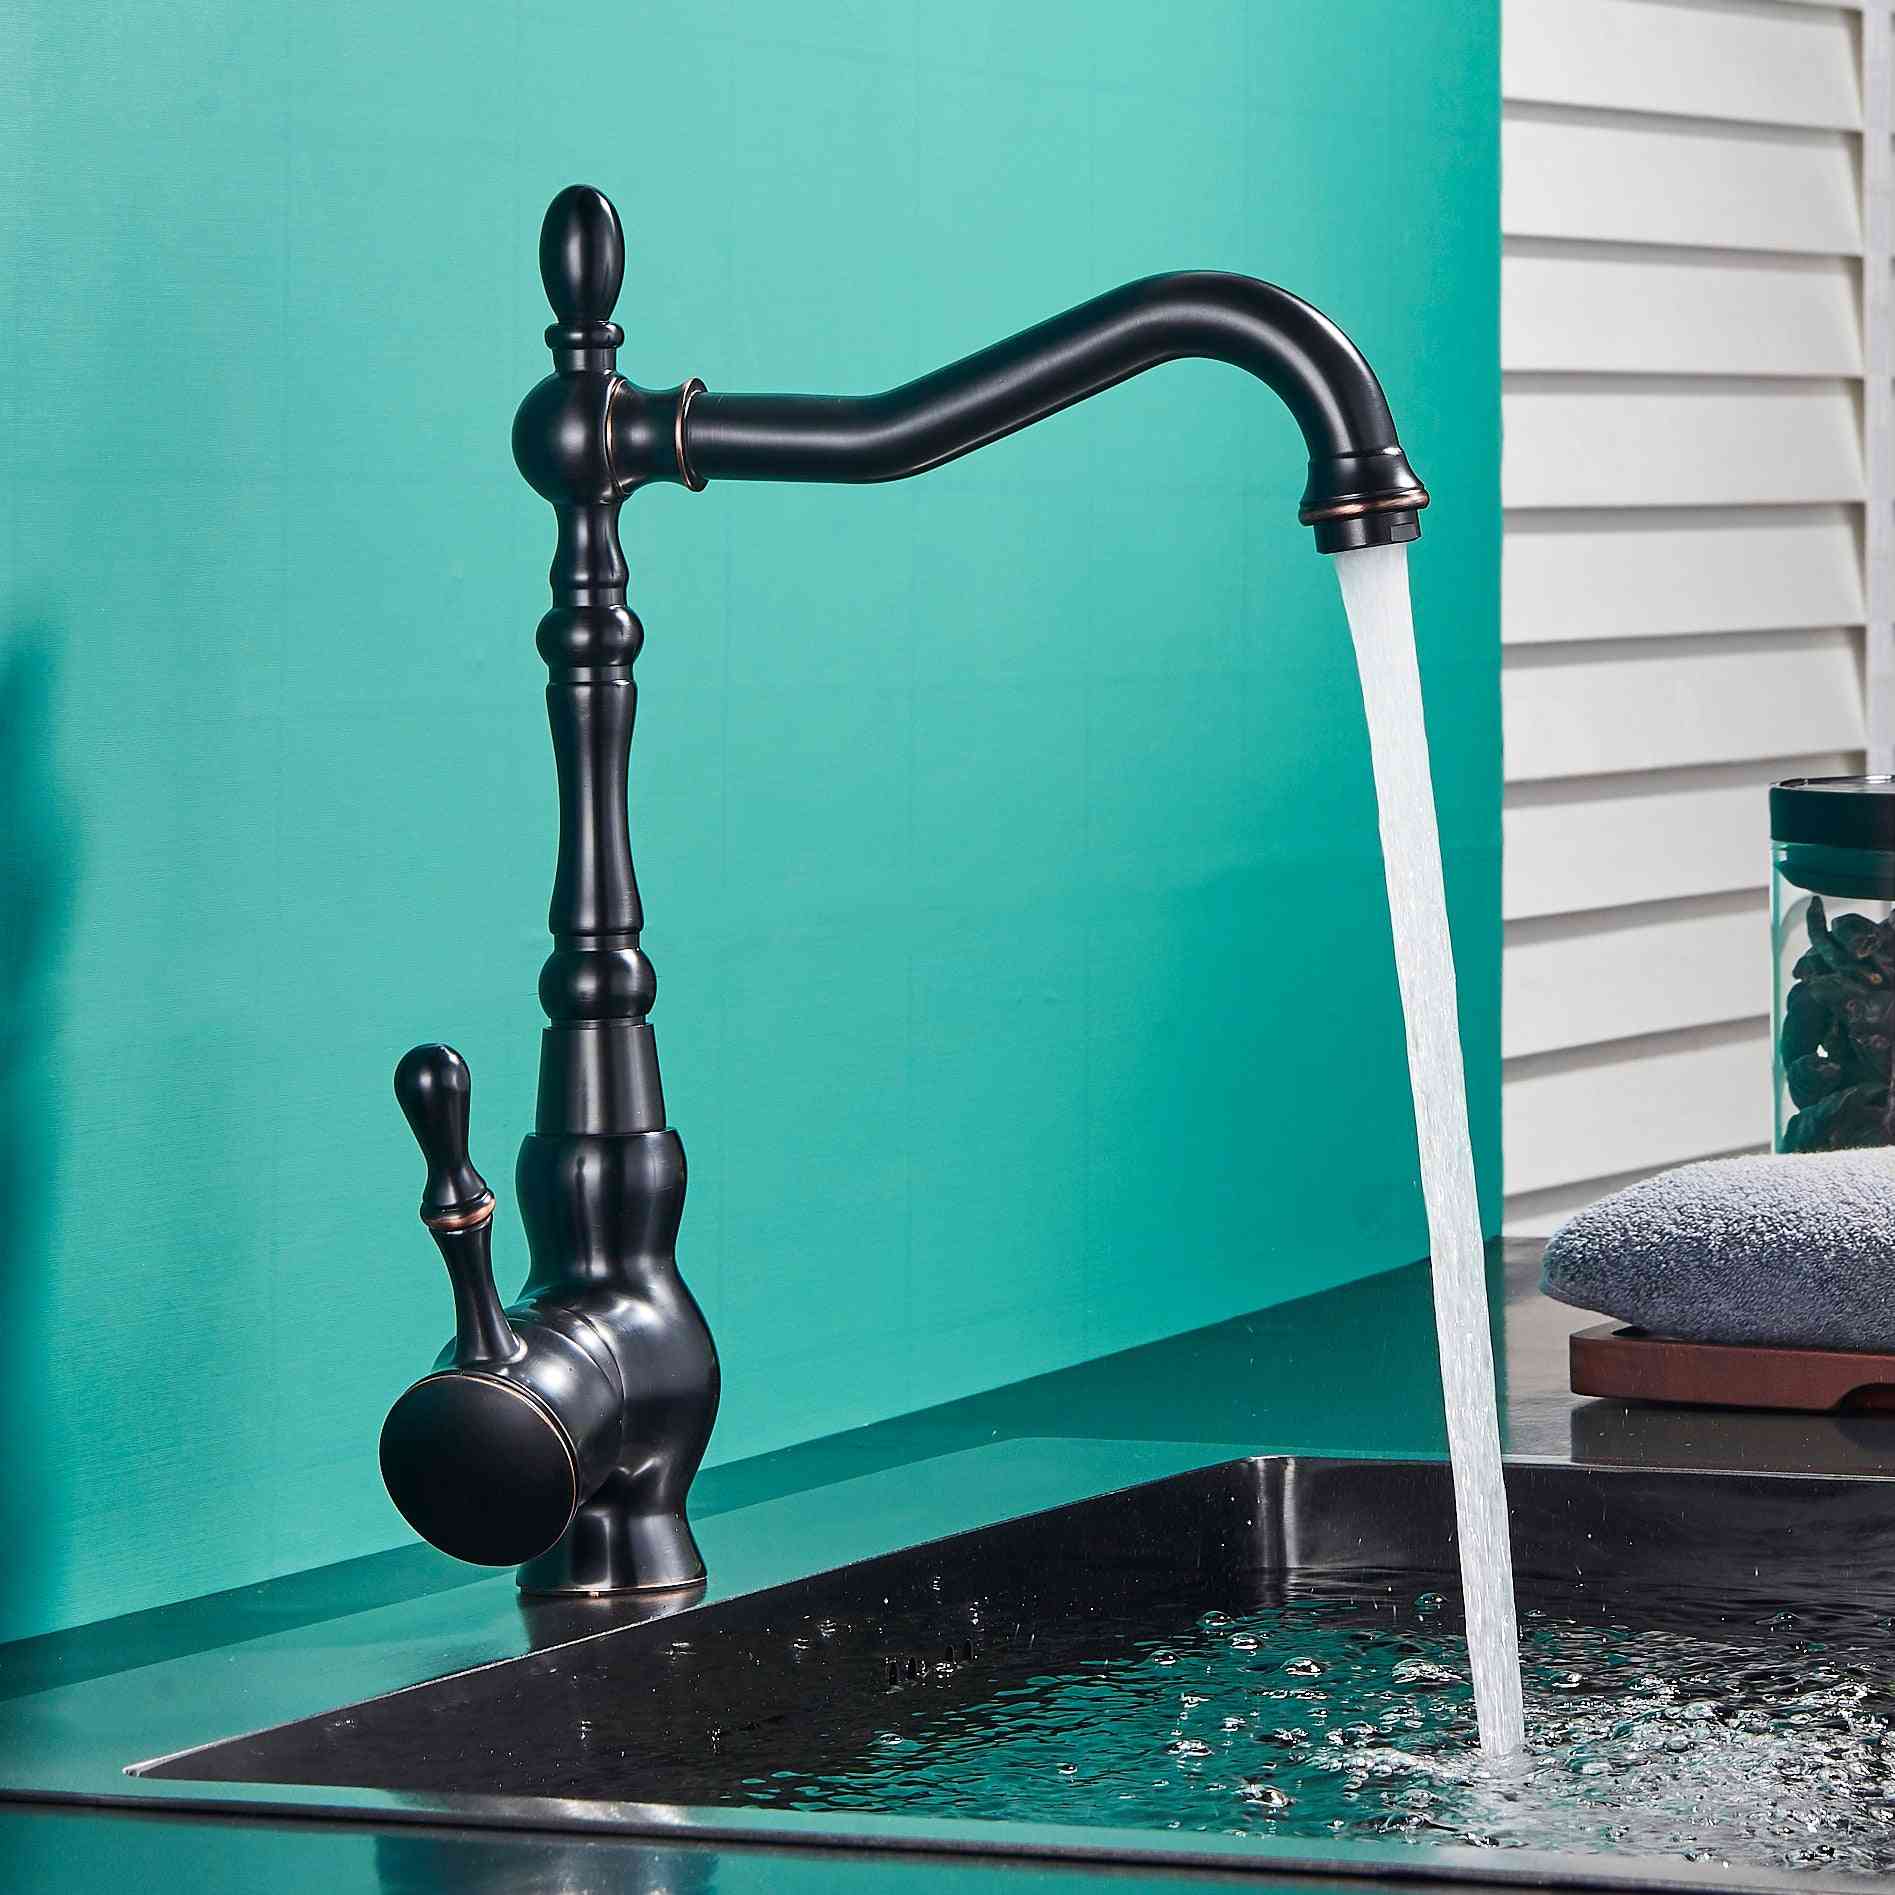 Deck Mount, Bathroom Kitchen Faucet, Single Handle, Rotate Basin Sink, Mixer Taps, Hot And Cold Water Mixers